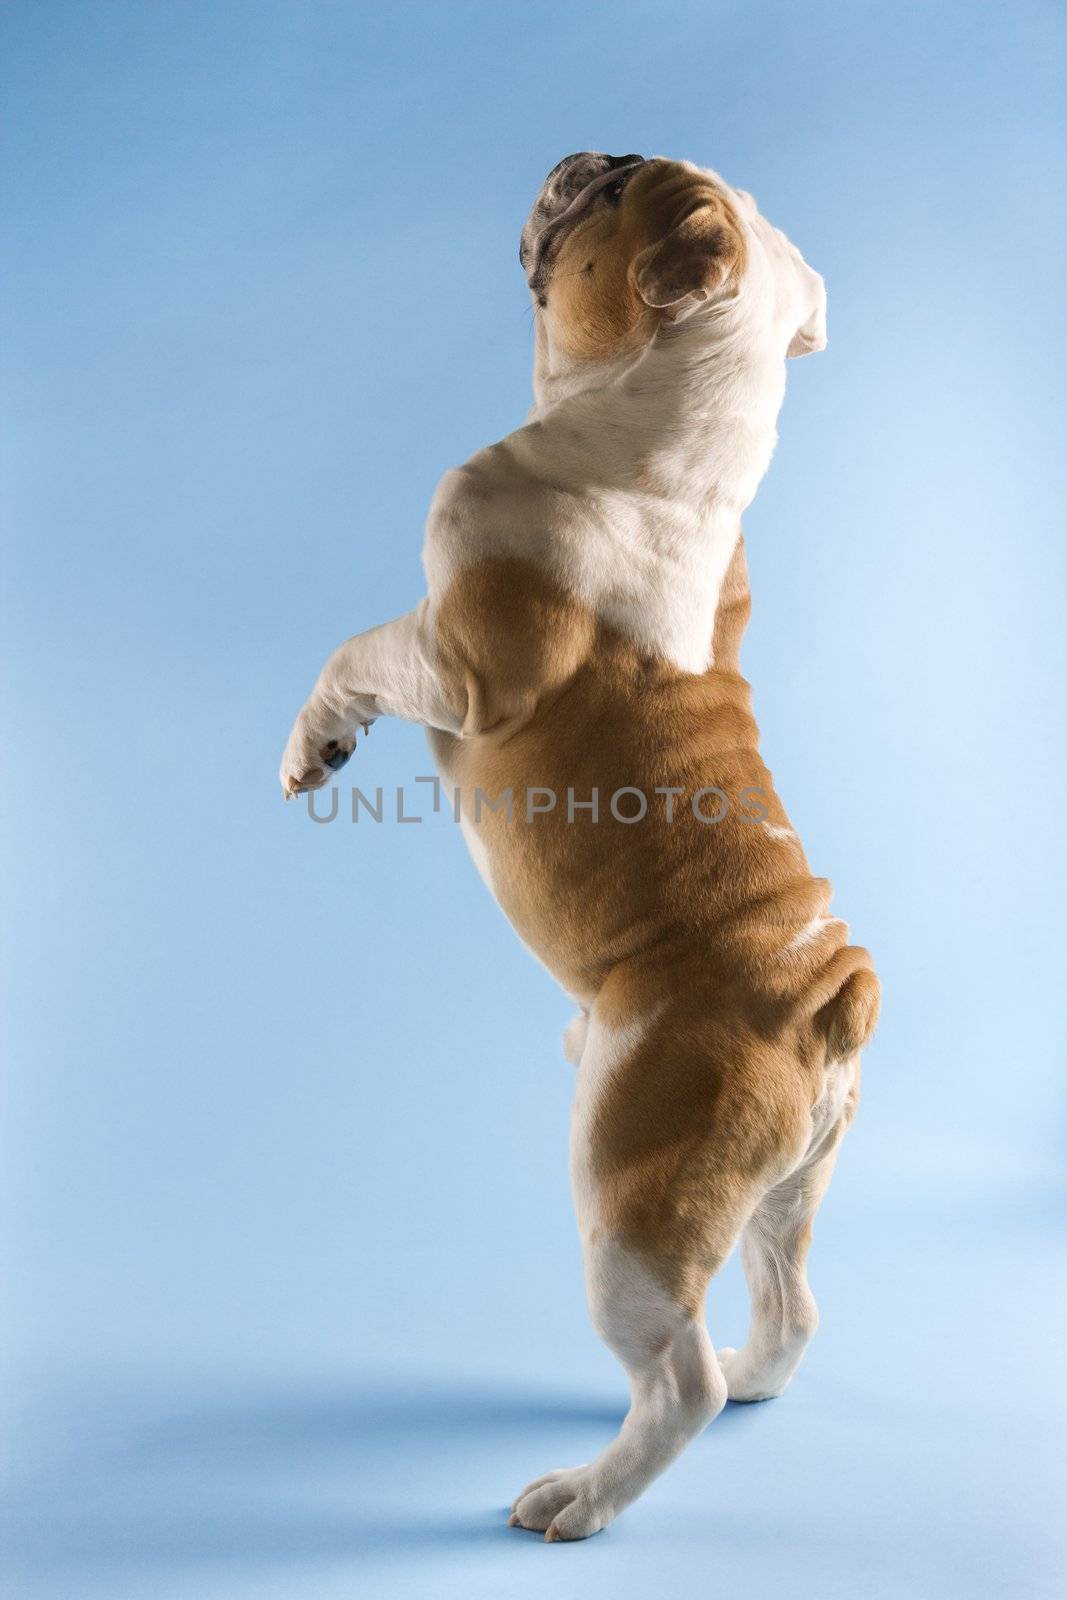 Back view of English Bulldog standing on hind legs on blue background.